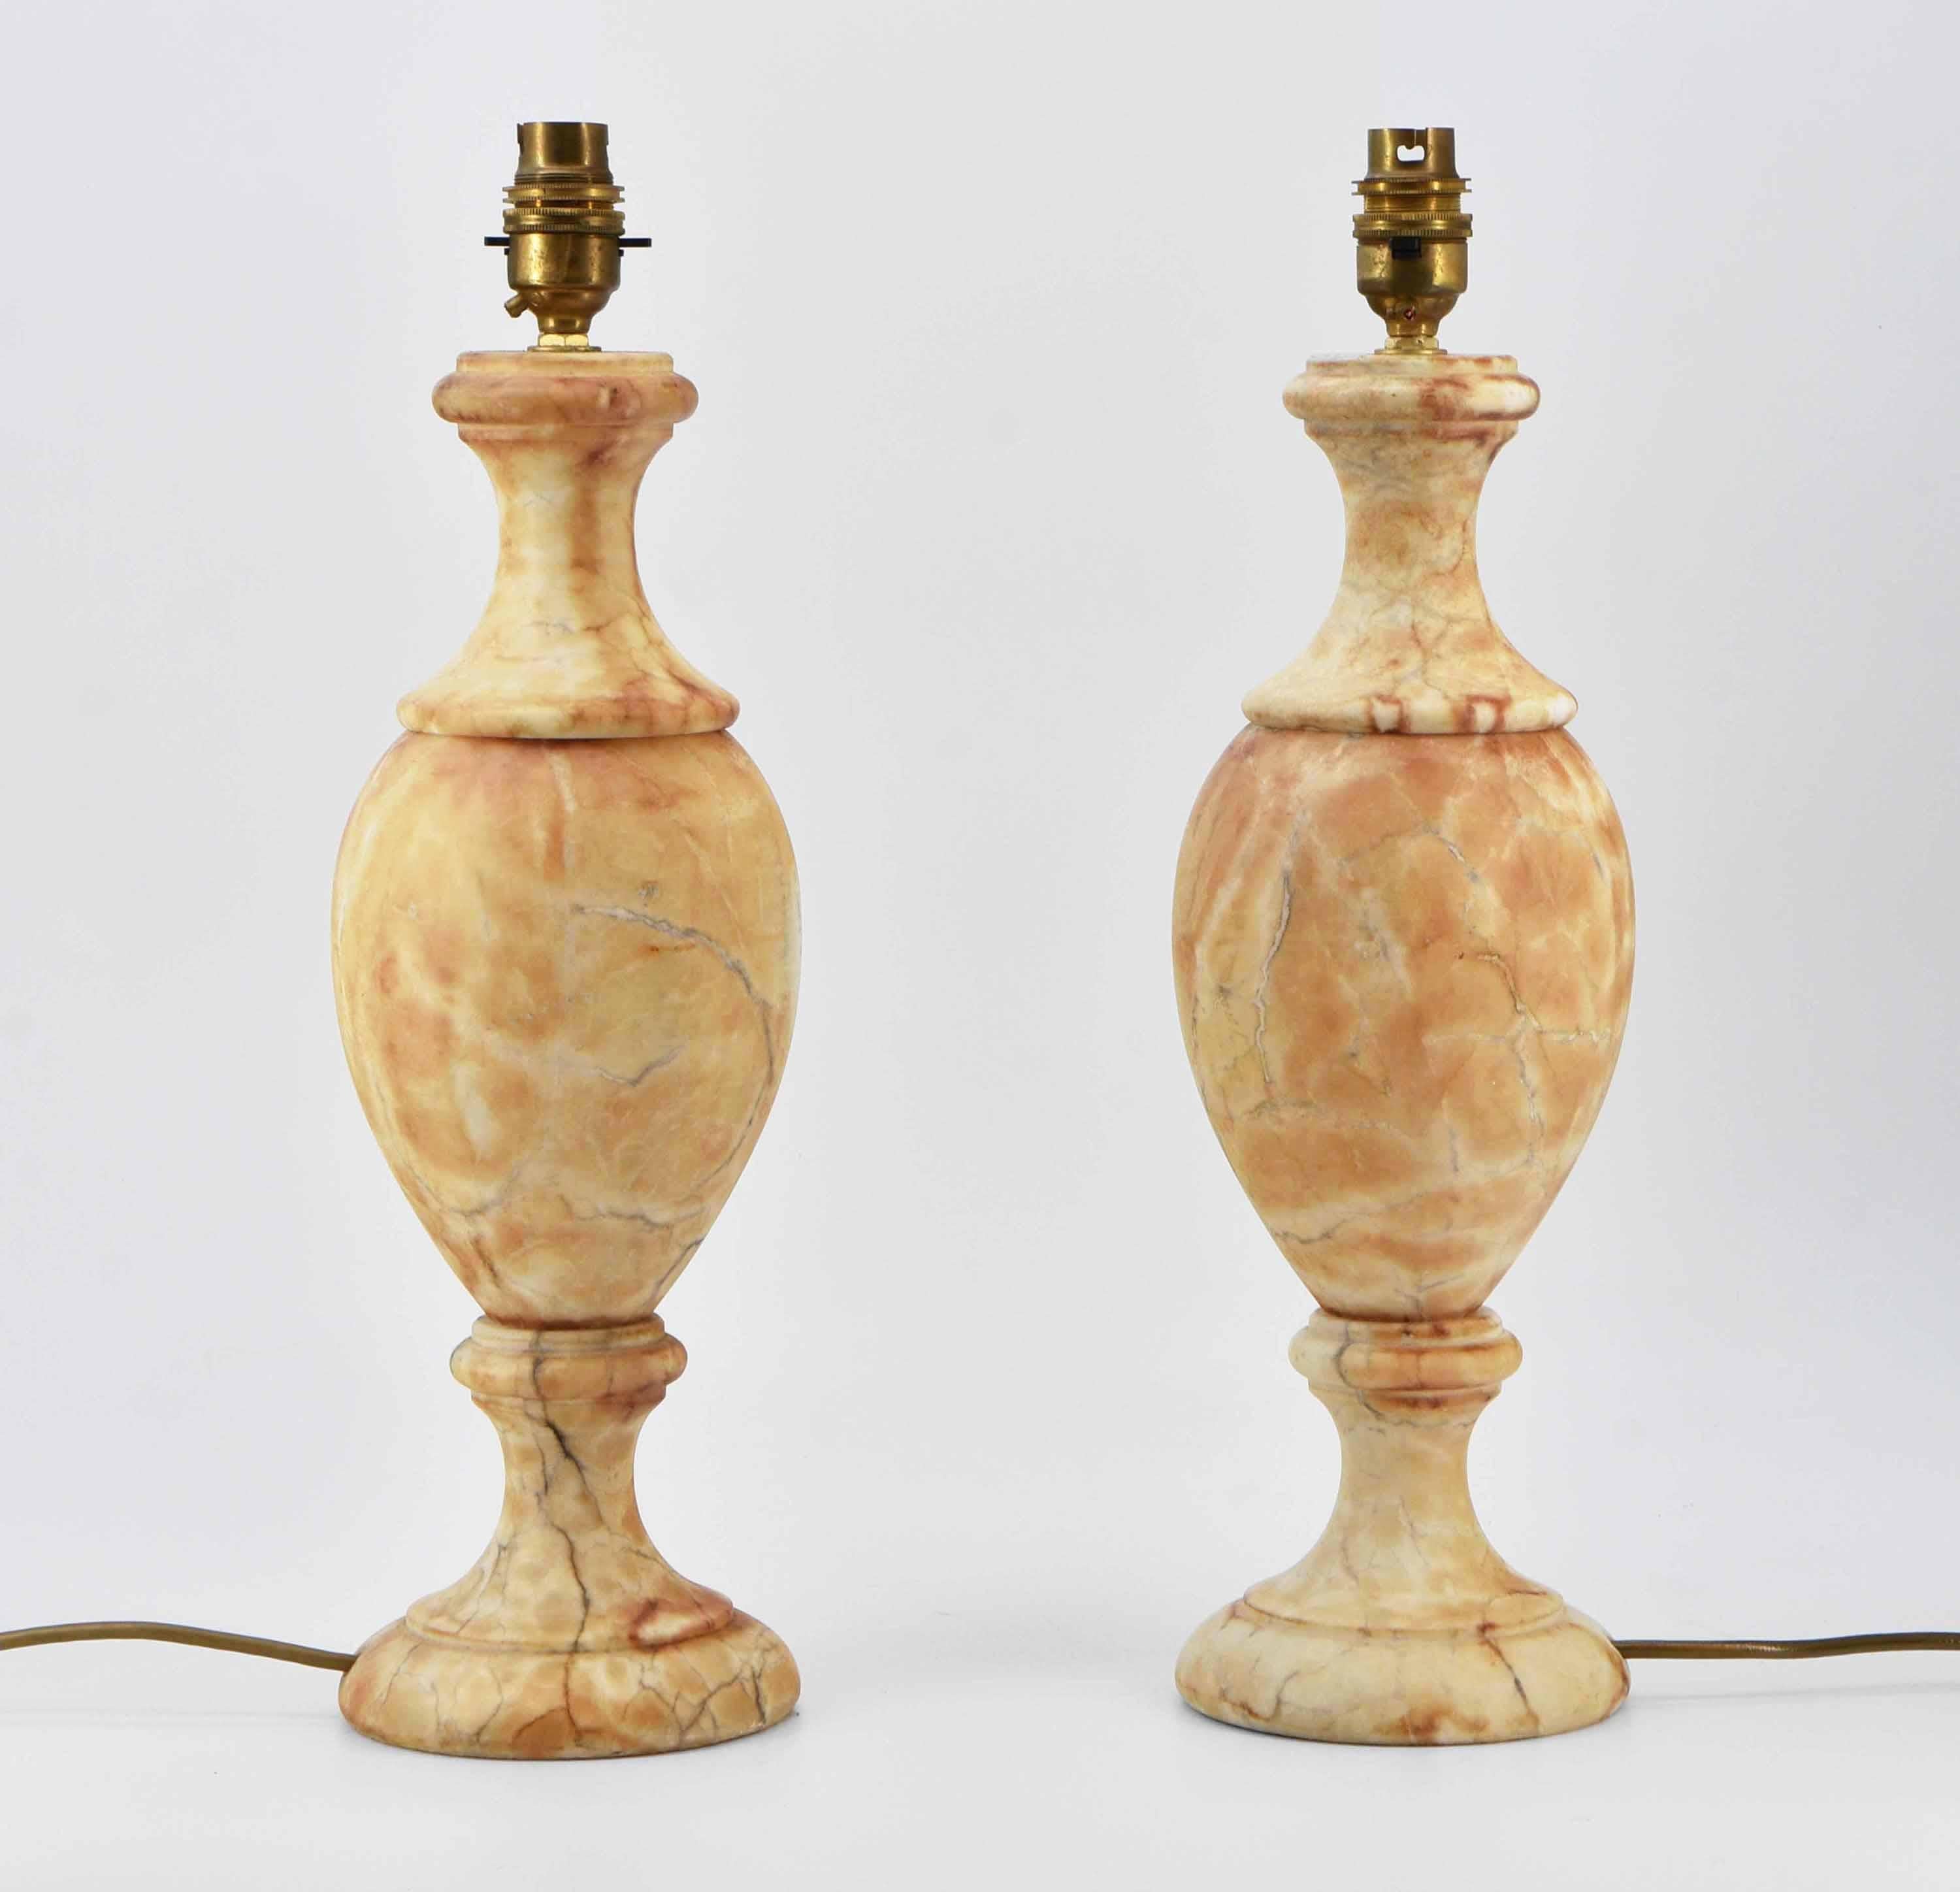 A pair of vintage alabaster Neoclassical style table lamps with wonderful figuring. Circa 1980. 

Free UK delivery via a selected parcel company. 

The electrics have been PAT tested, a new gold cable has been added to one. The cable lengths are